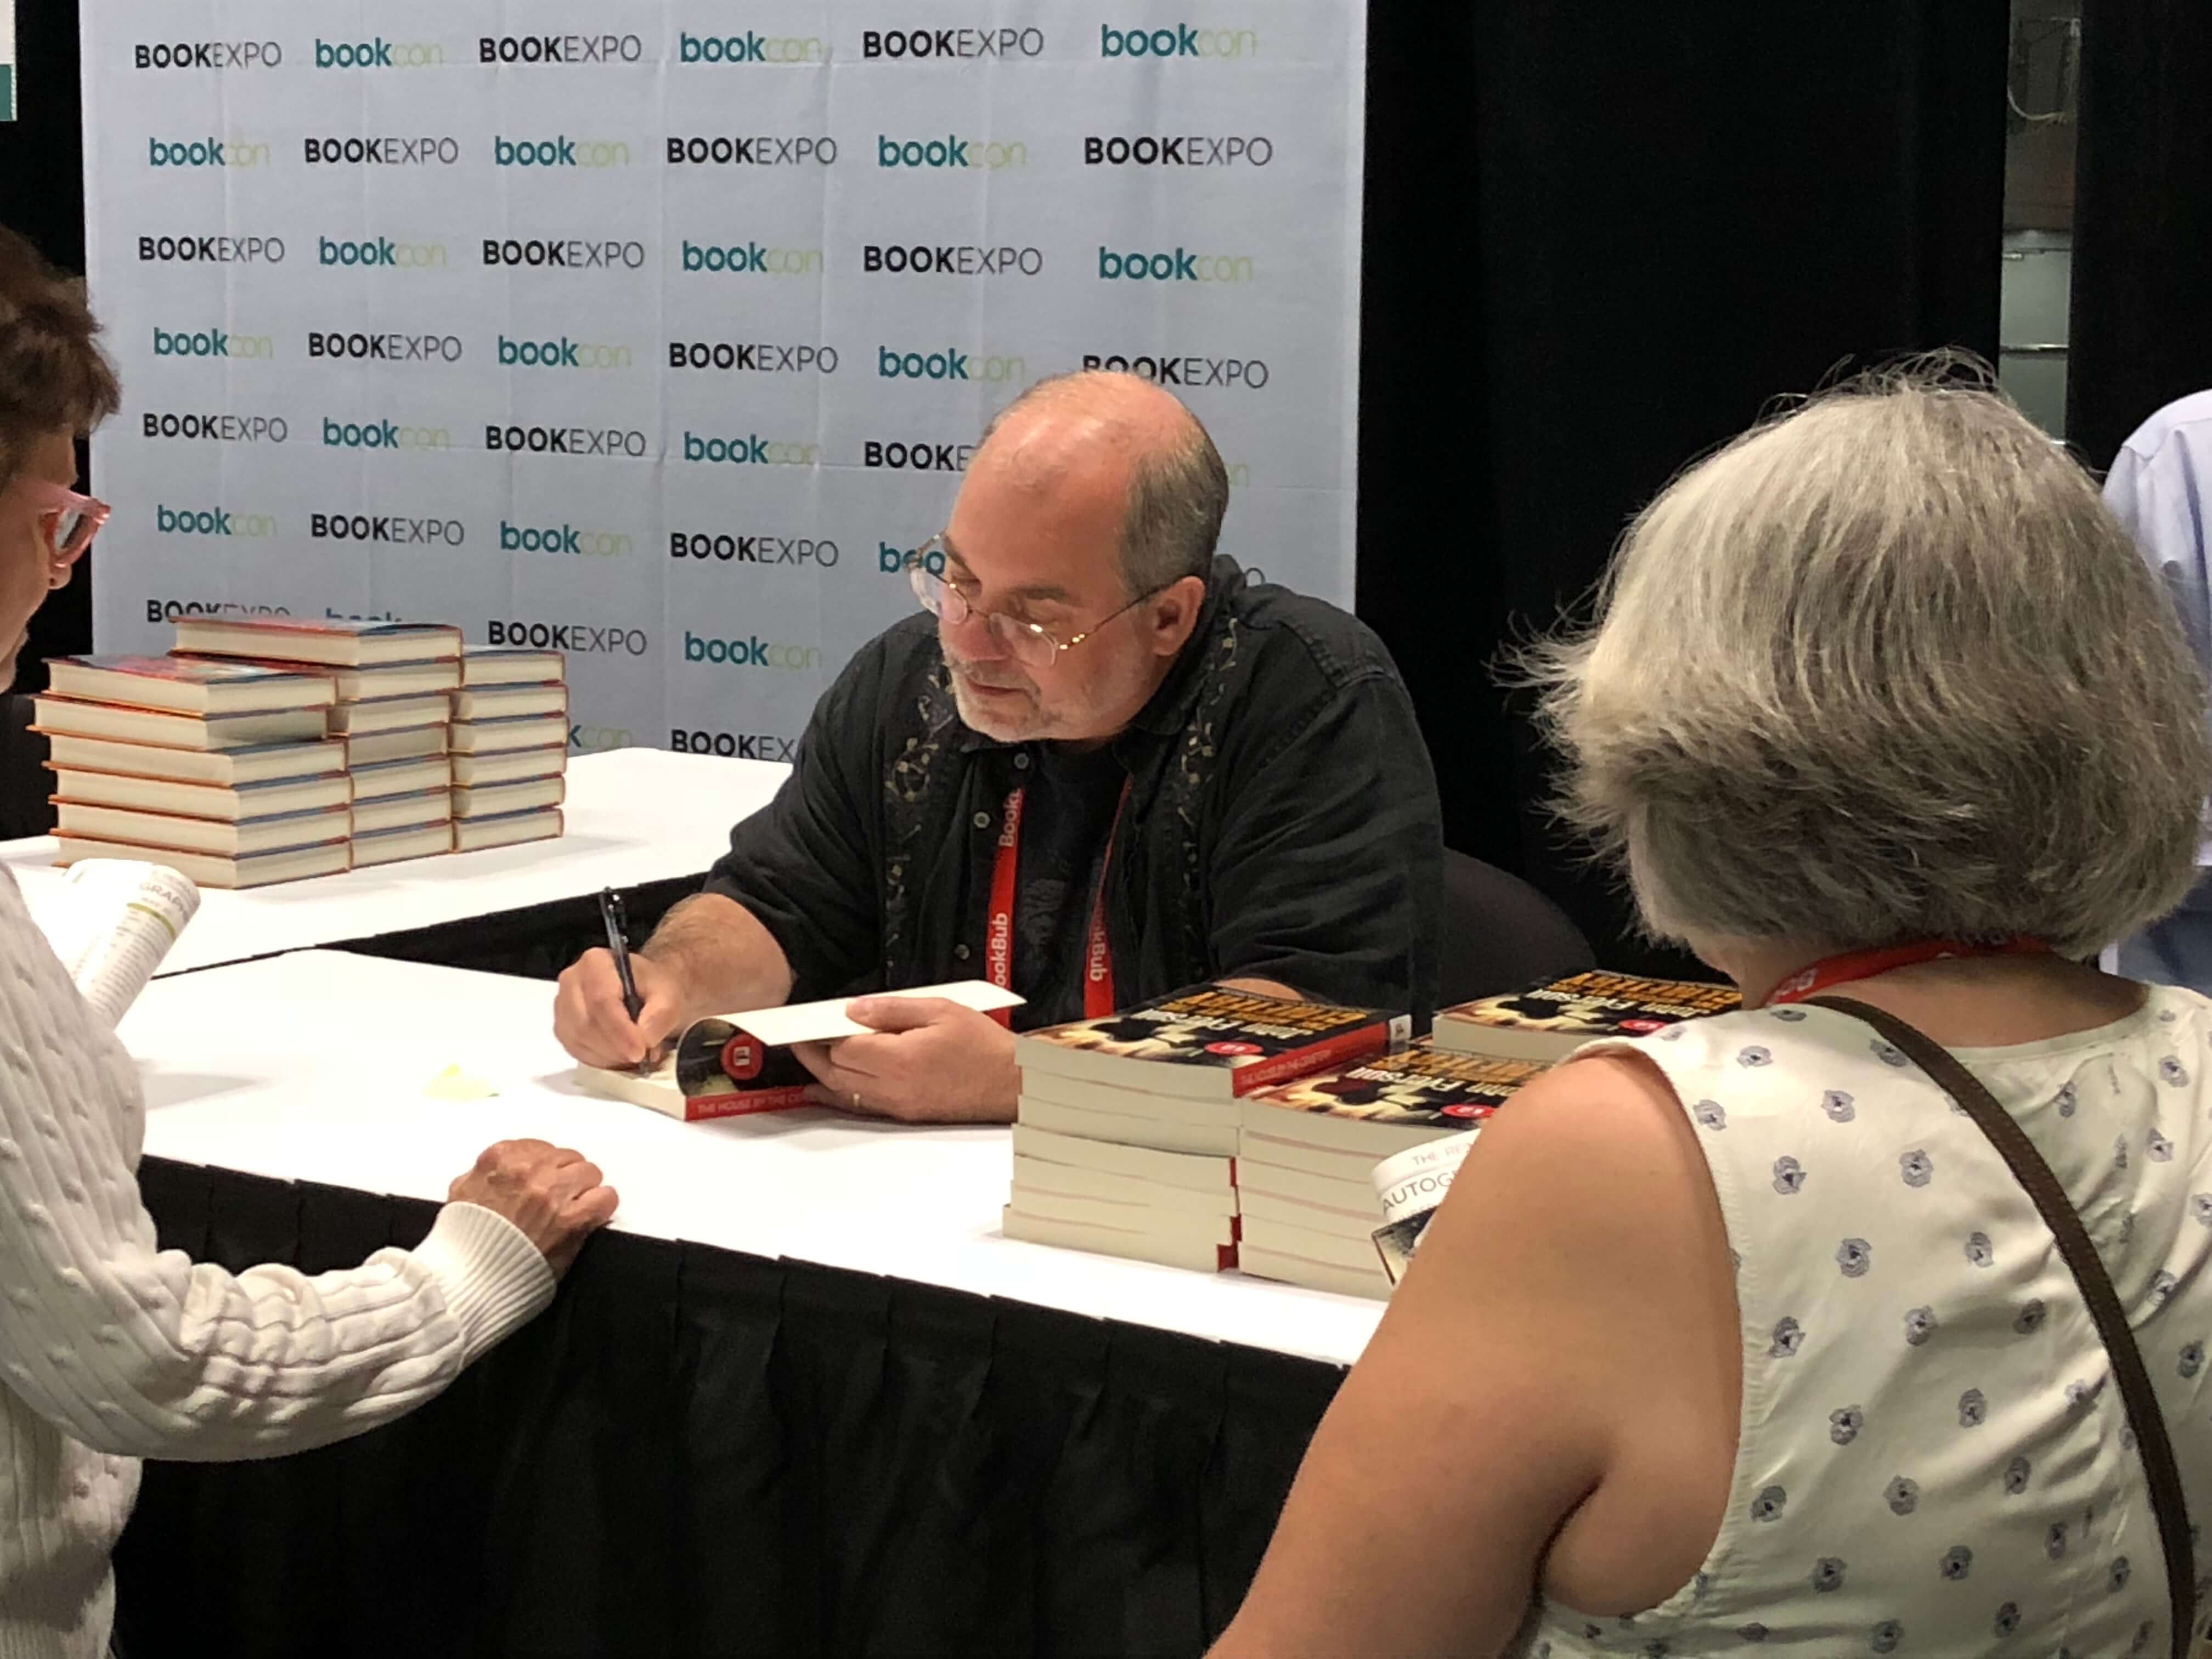 John Everson author signing at Flame Tree BookExpo18